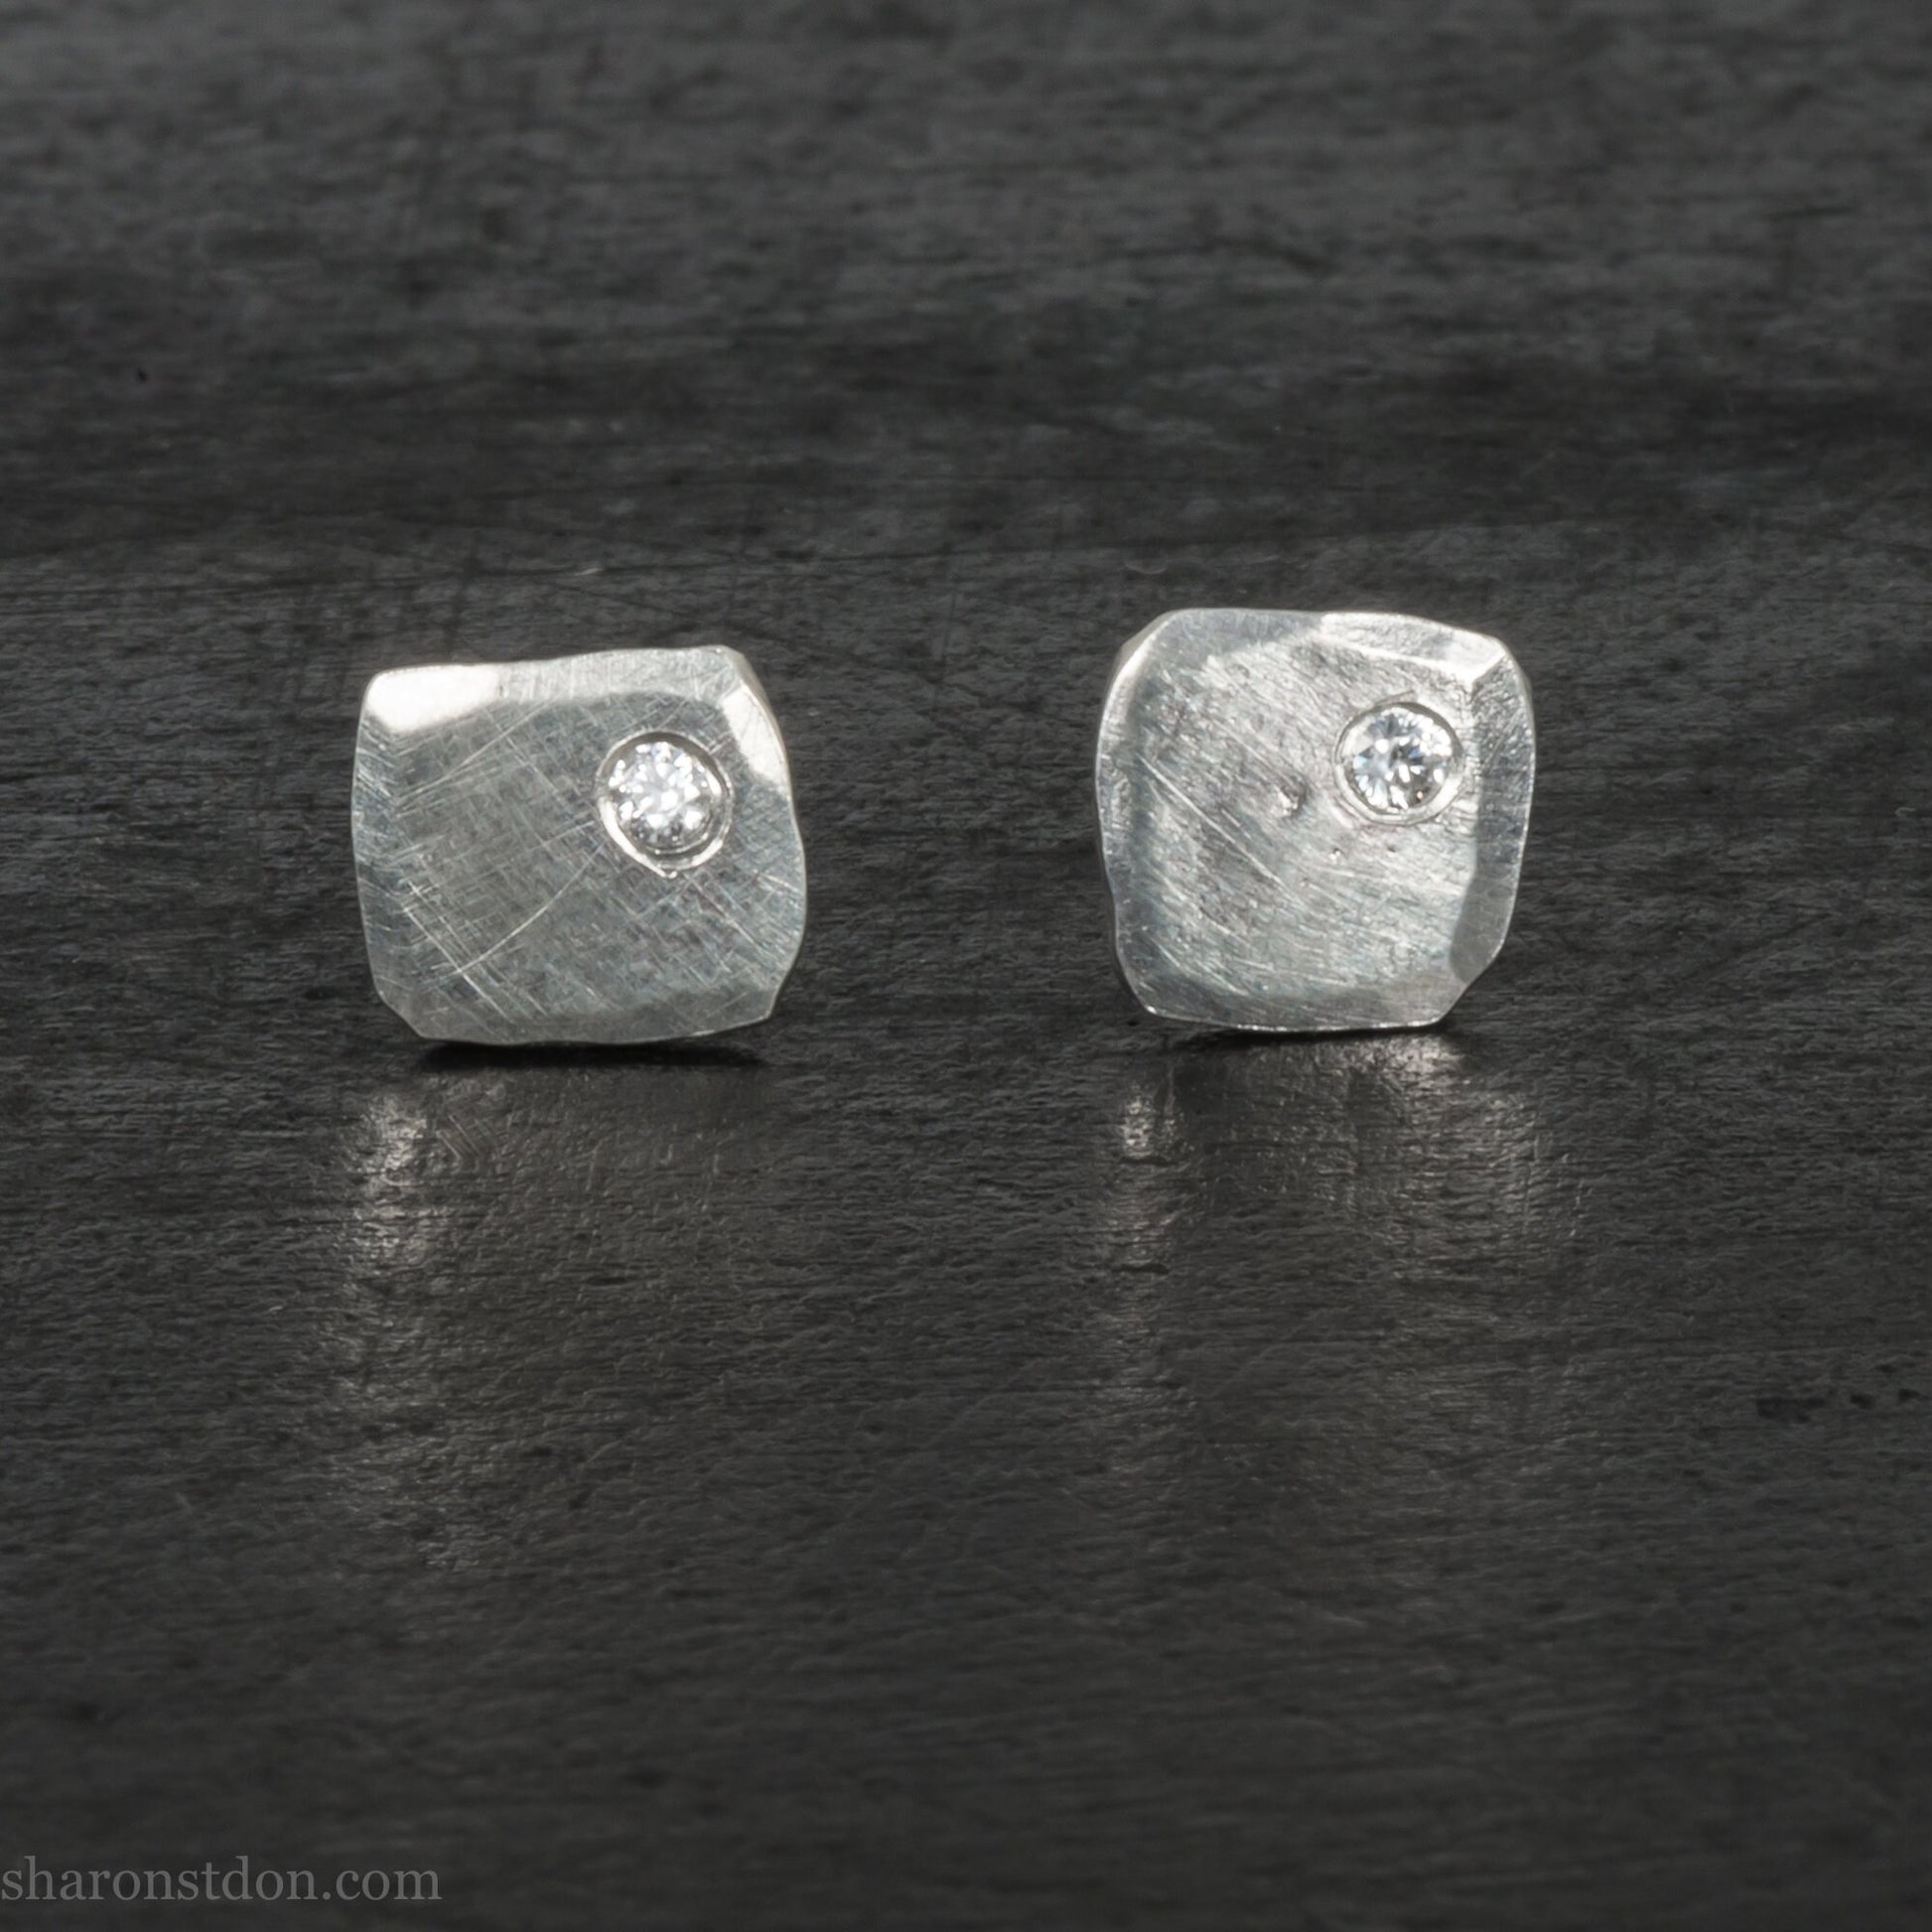 Imitation diamond stud earrings for men or women | Small 7mm squares, 925 sterling silver, matte brushed finish | Handmade unique gift